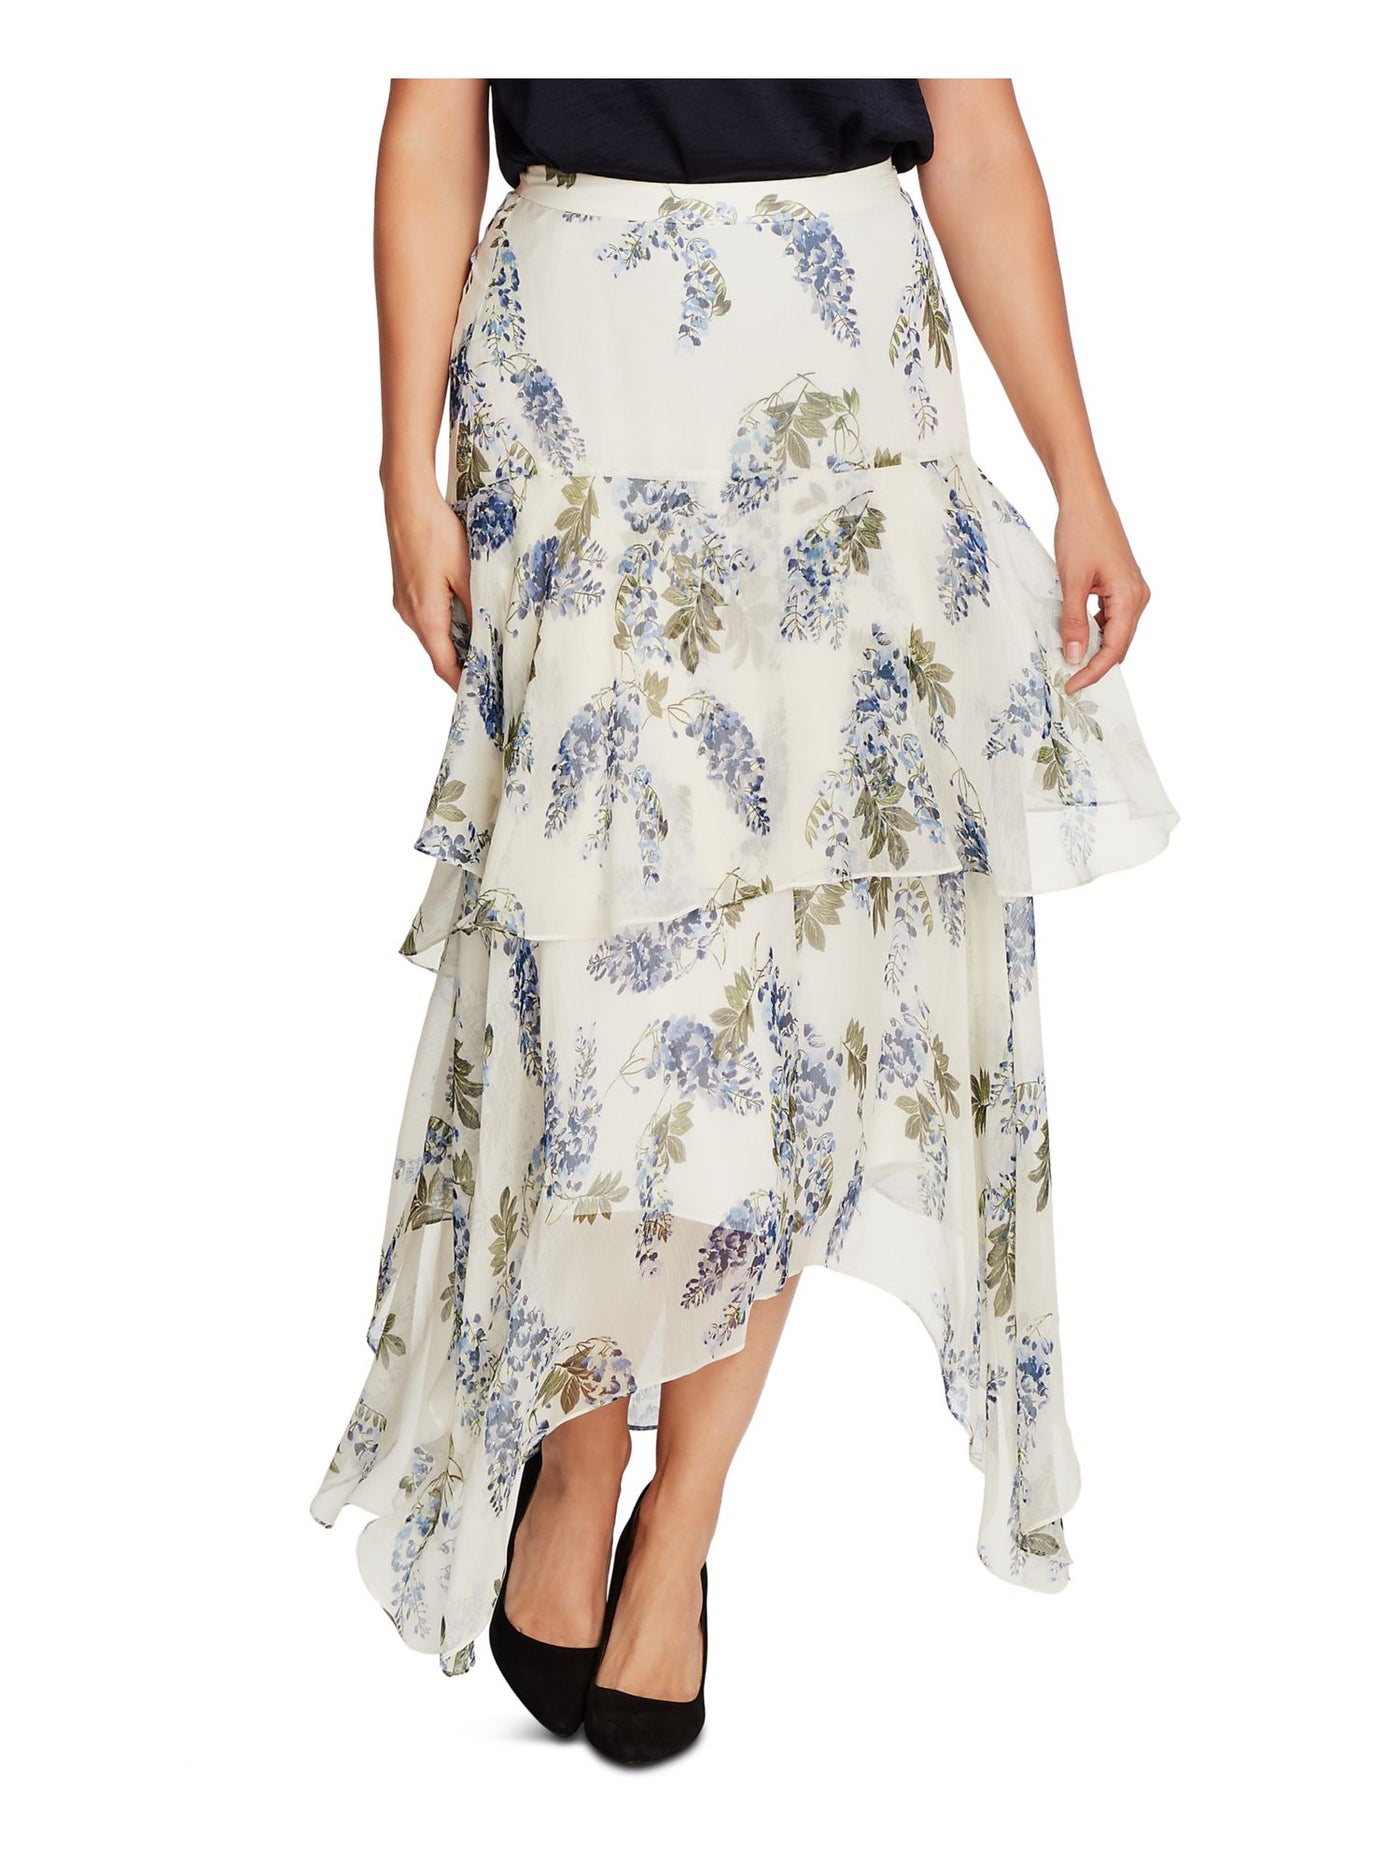 VINCE CAMUTO Womens White Ruffled Floral Maxi Ruffled Skirt 8